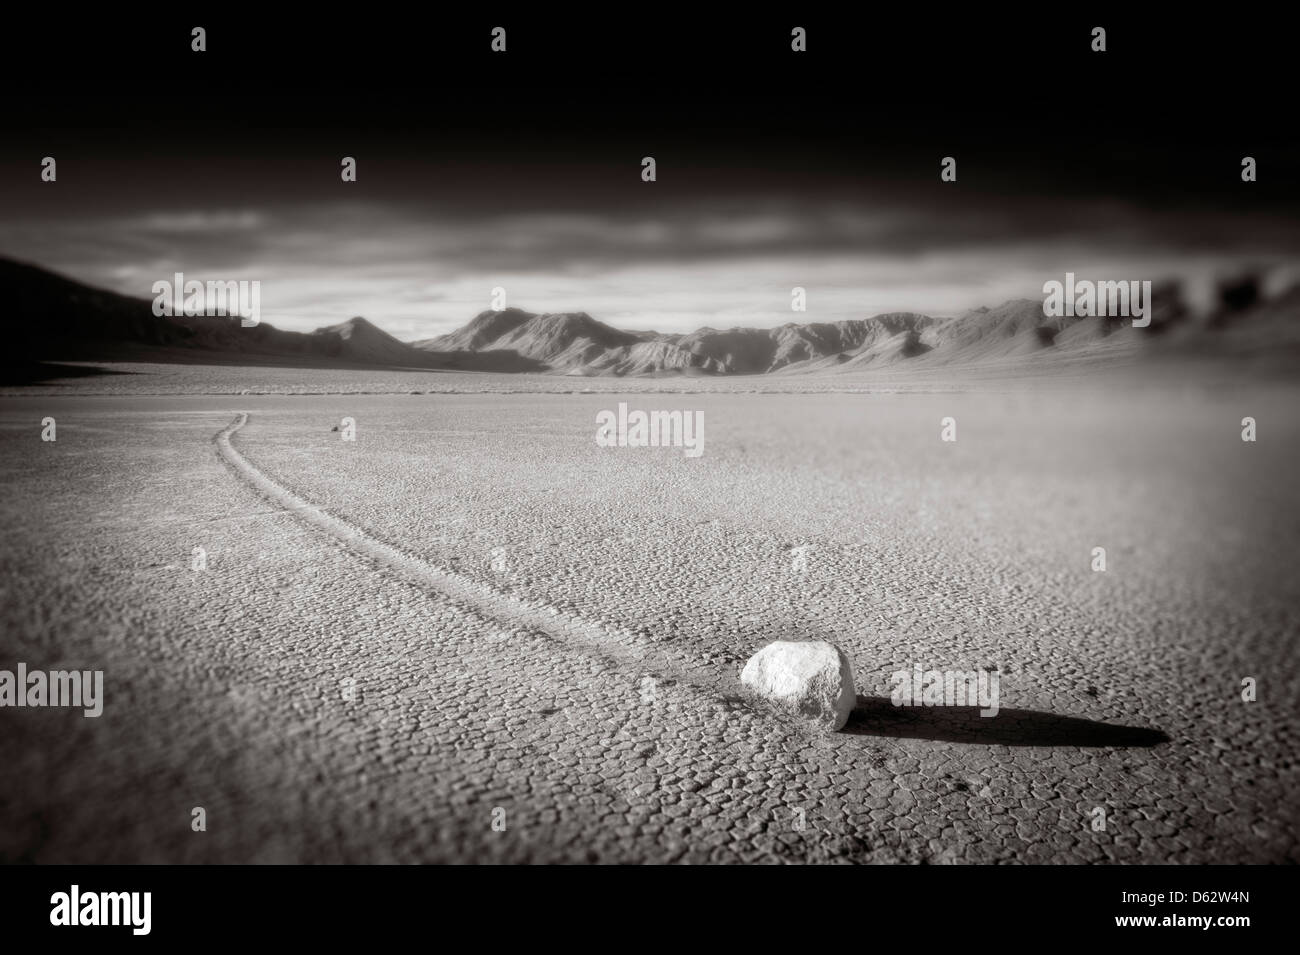 Moving rock at The Racetrack, Death Valley, California, USA Stock Photo